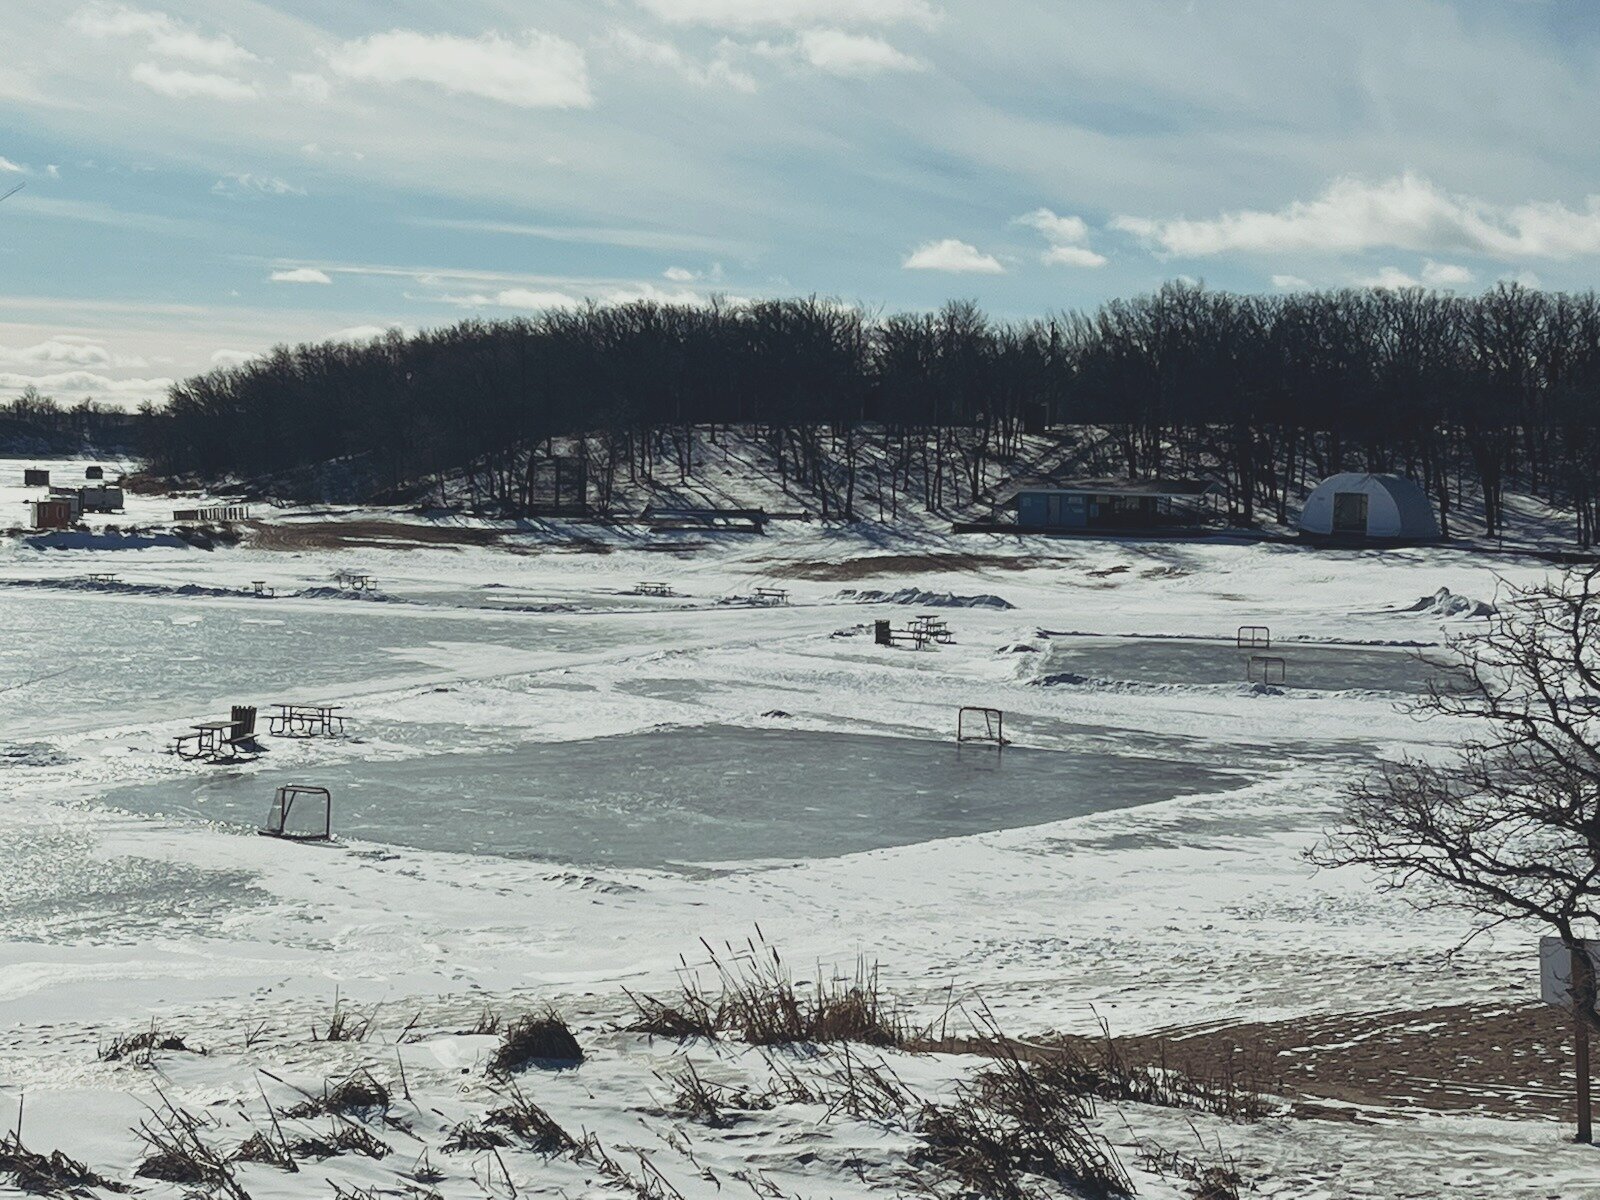 📢 Attention Hockey Fans! 🎉 The ice rink surfaces at Lake Minnewasta are OPEN and ready for some fun! ⛸️❄️

A huge shoutout to our Parks &amp; Urban Forestry Department for their work in making the ice rinks safe and enjoyable for everyone. 🙌 

Don